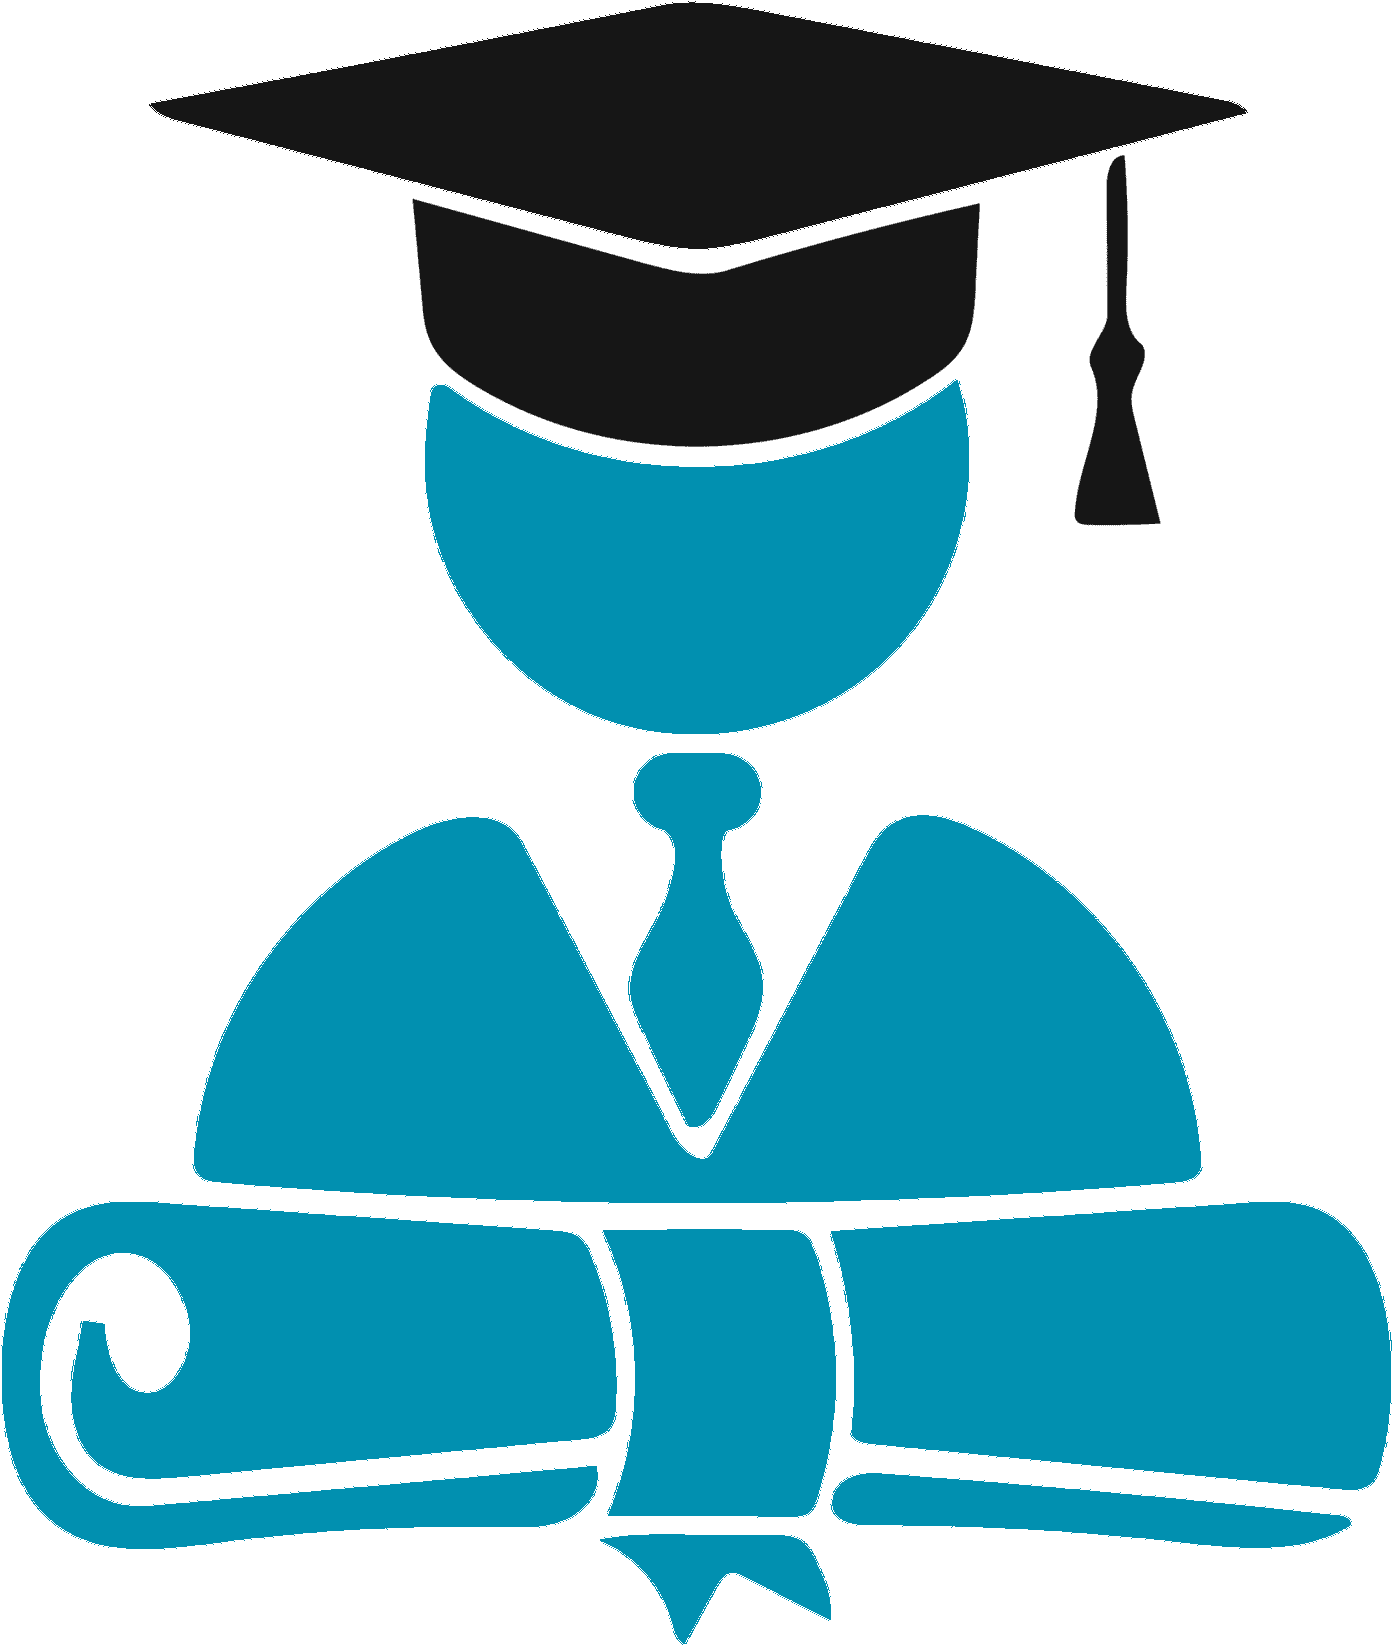 A Blue Graduation Cap And Gown